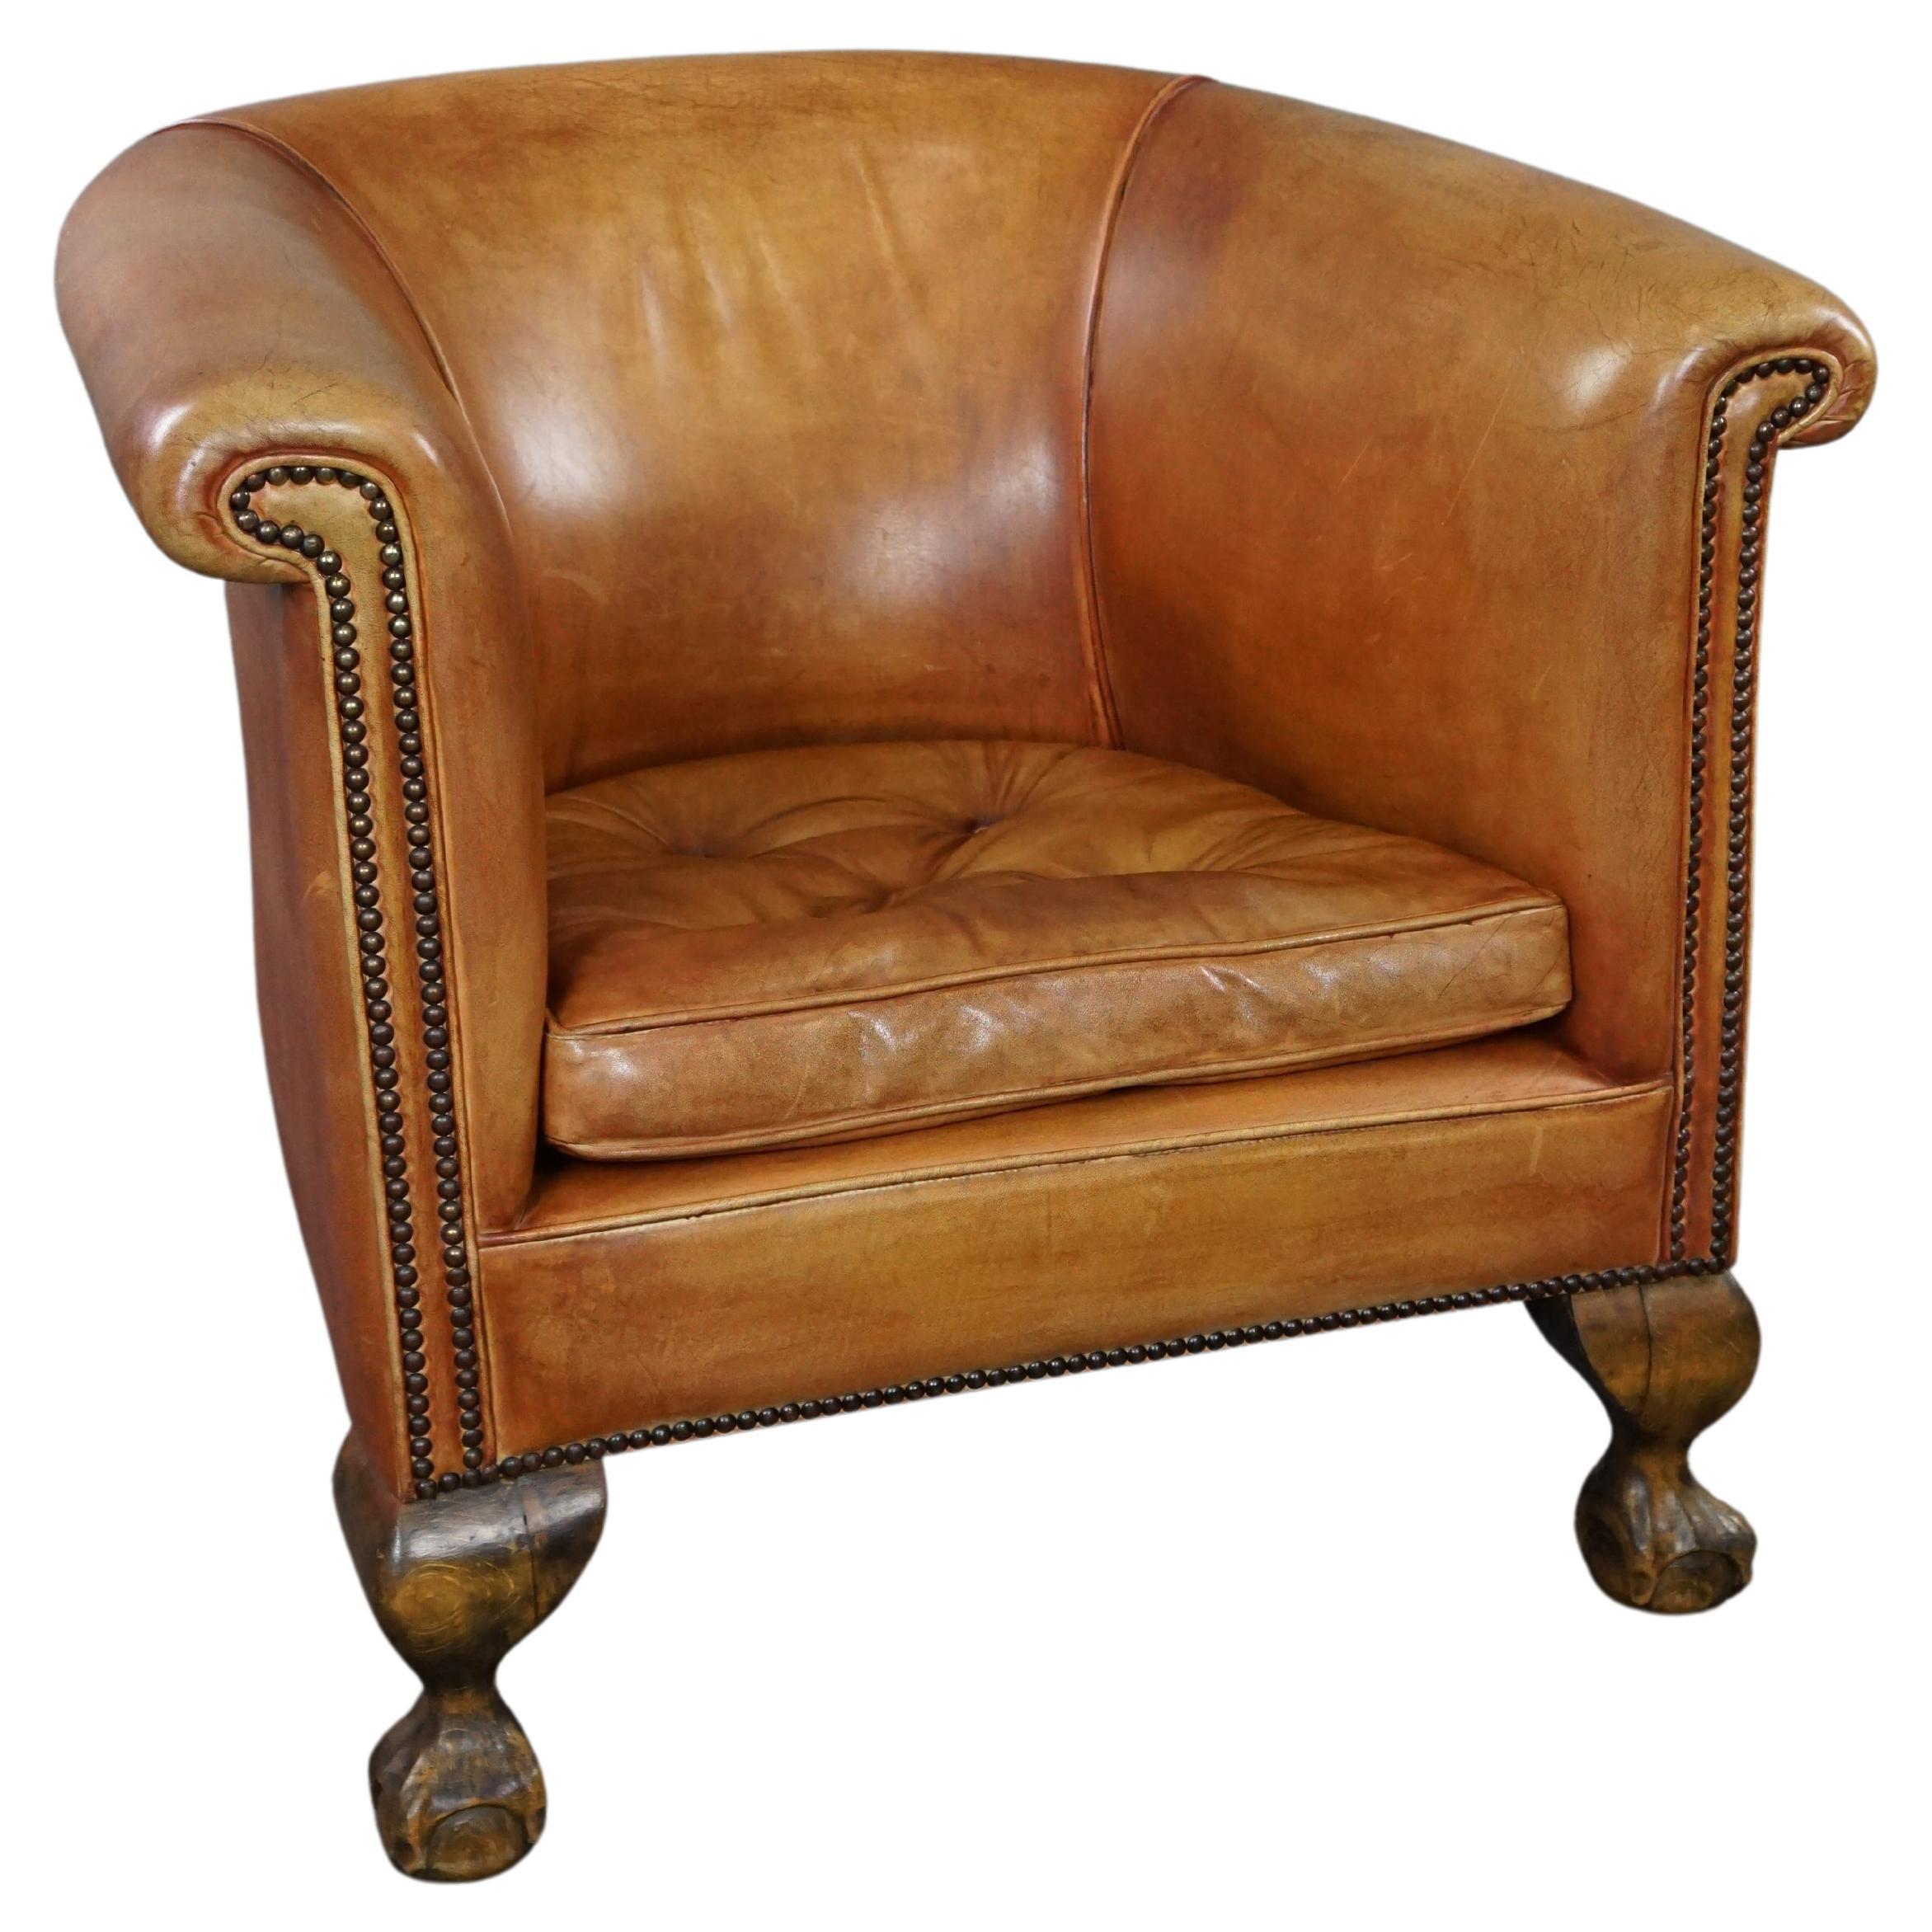 Very beautiful, uncommon cowhide club chair